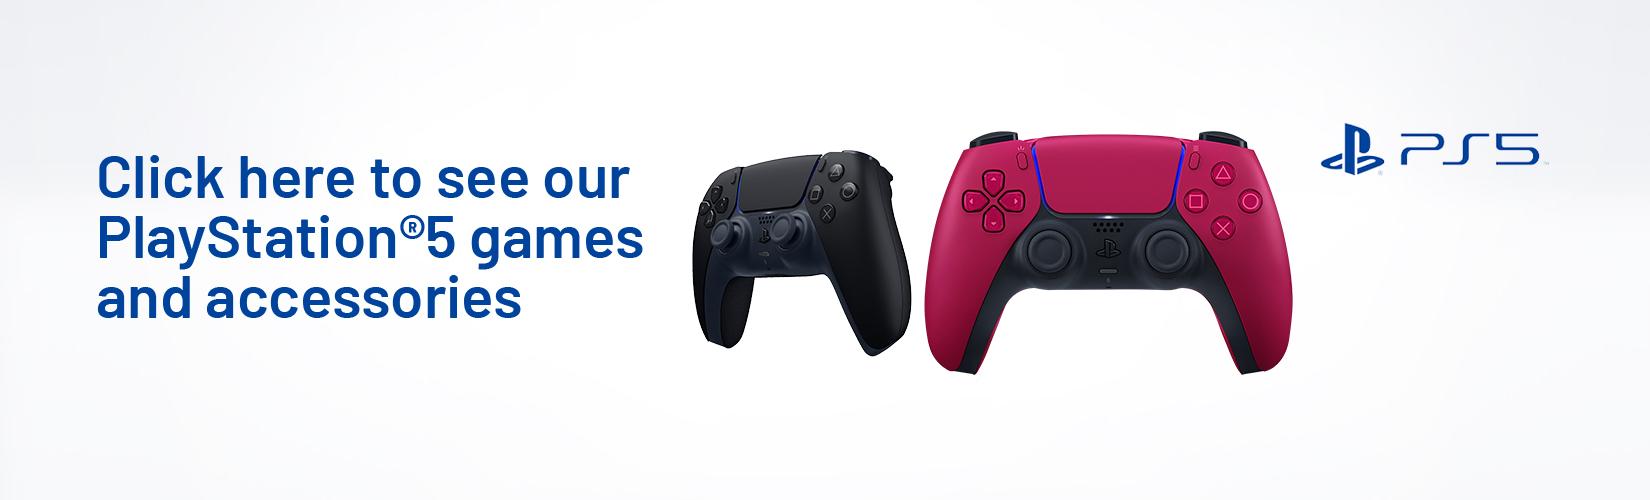 Click here to see our Playstation®5 games and accessories.